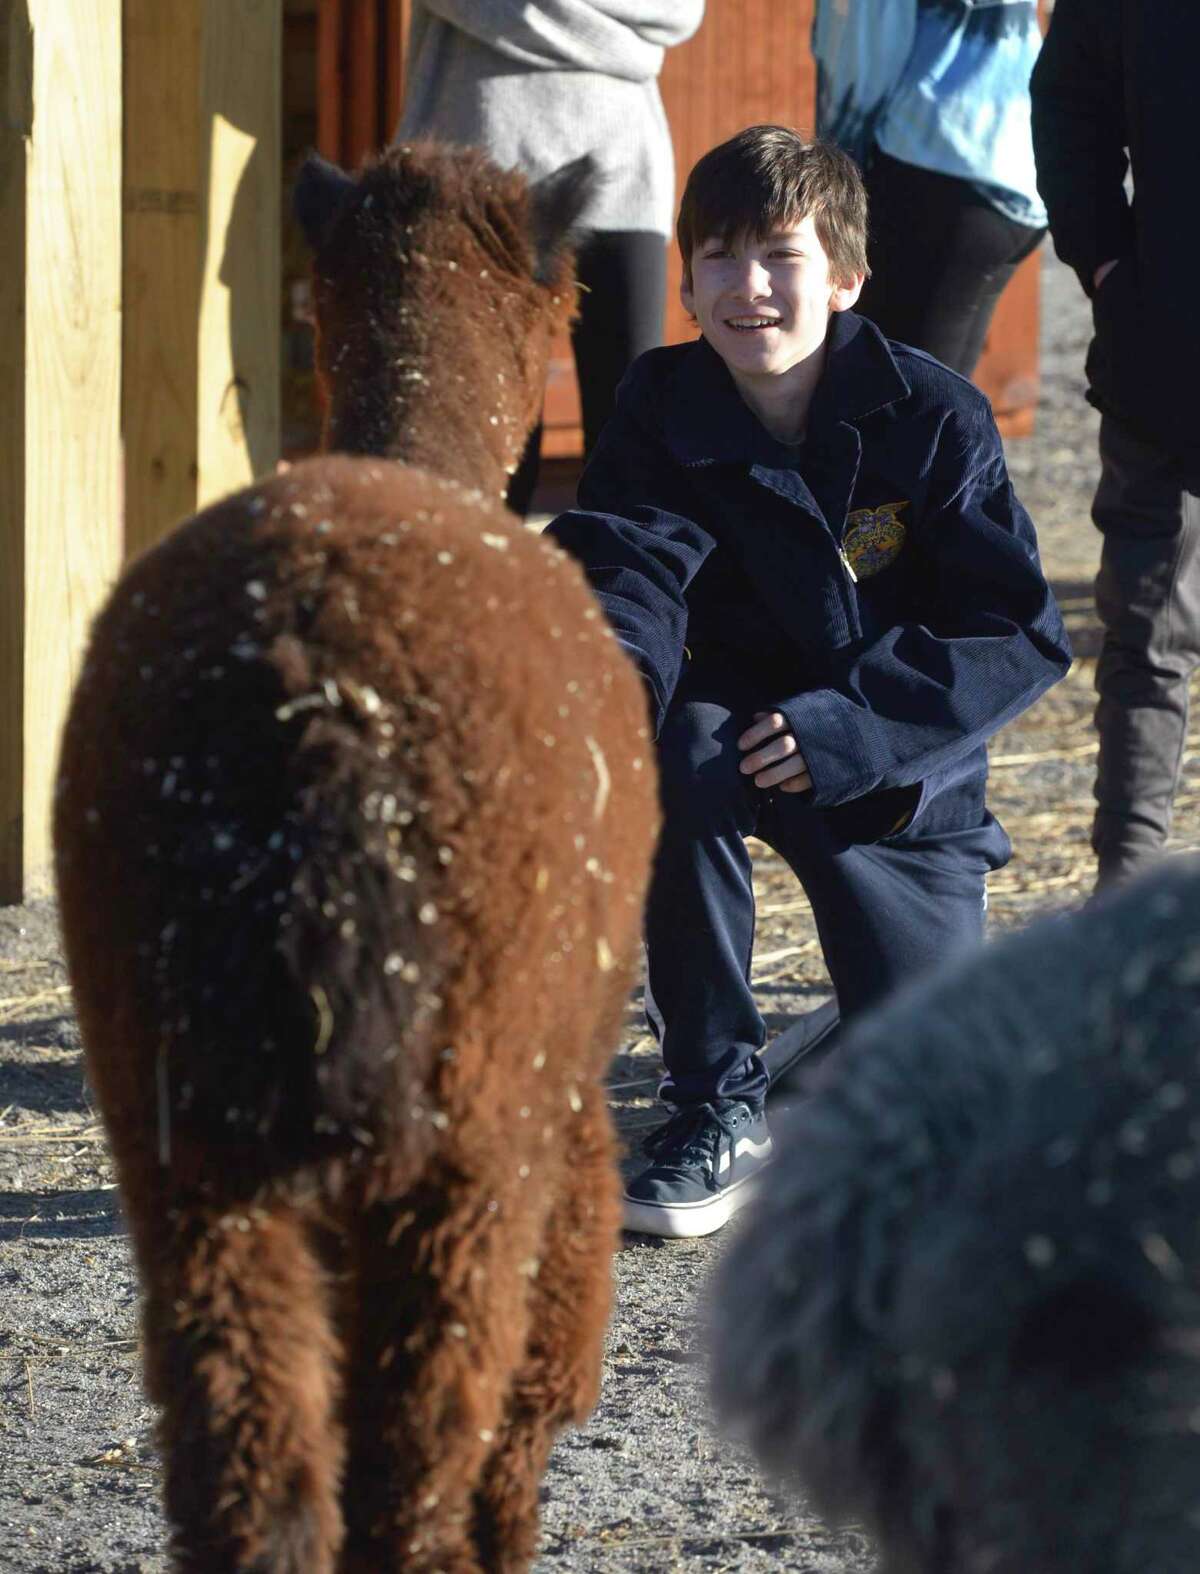 A.J. Conrad holds out some feed for one of the alpacas in the agriscience program at Shepaug Valley School. Thursday, January 30, 2020, in Washington, Conn.